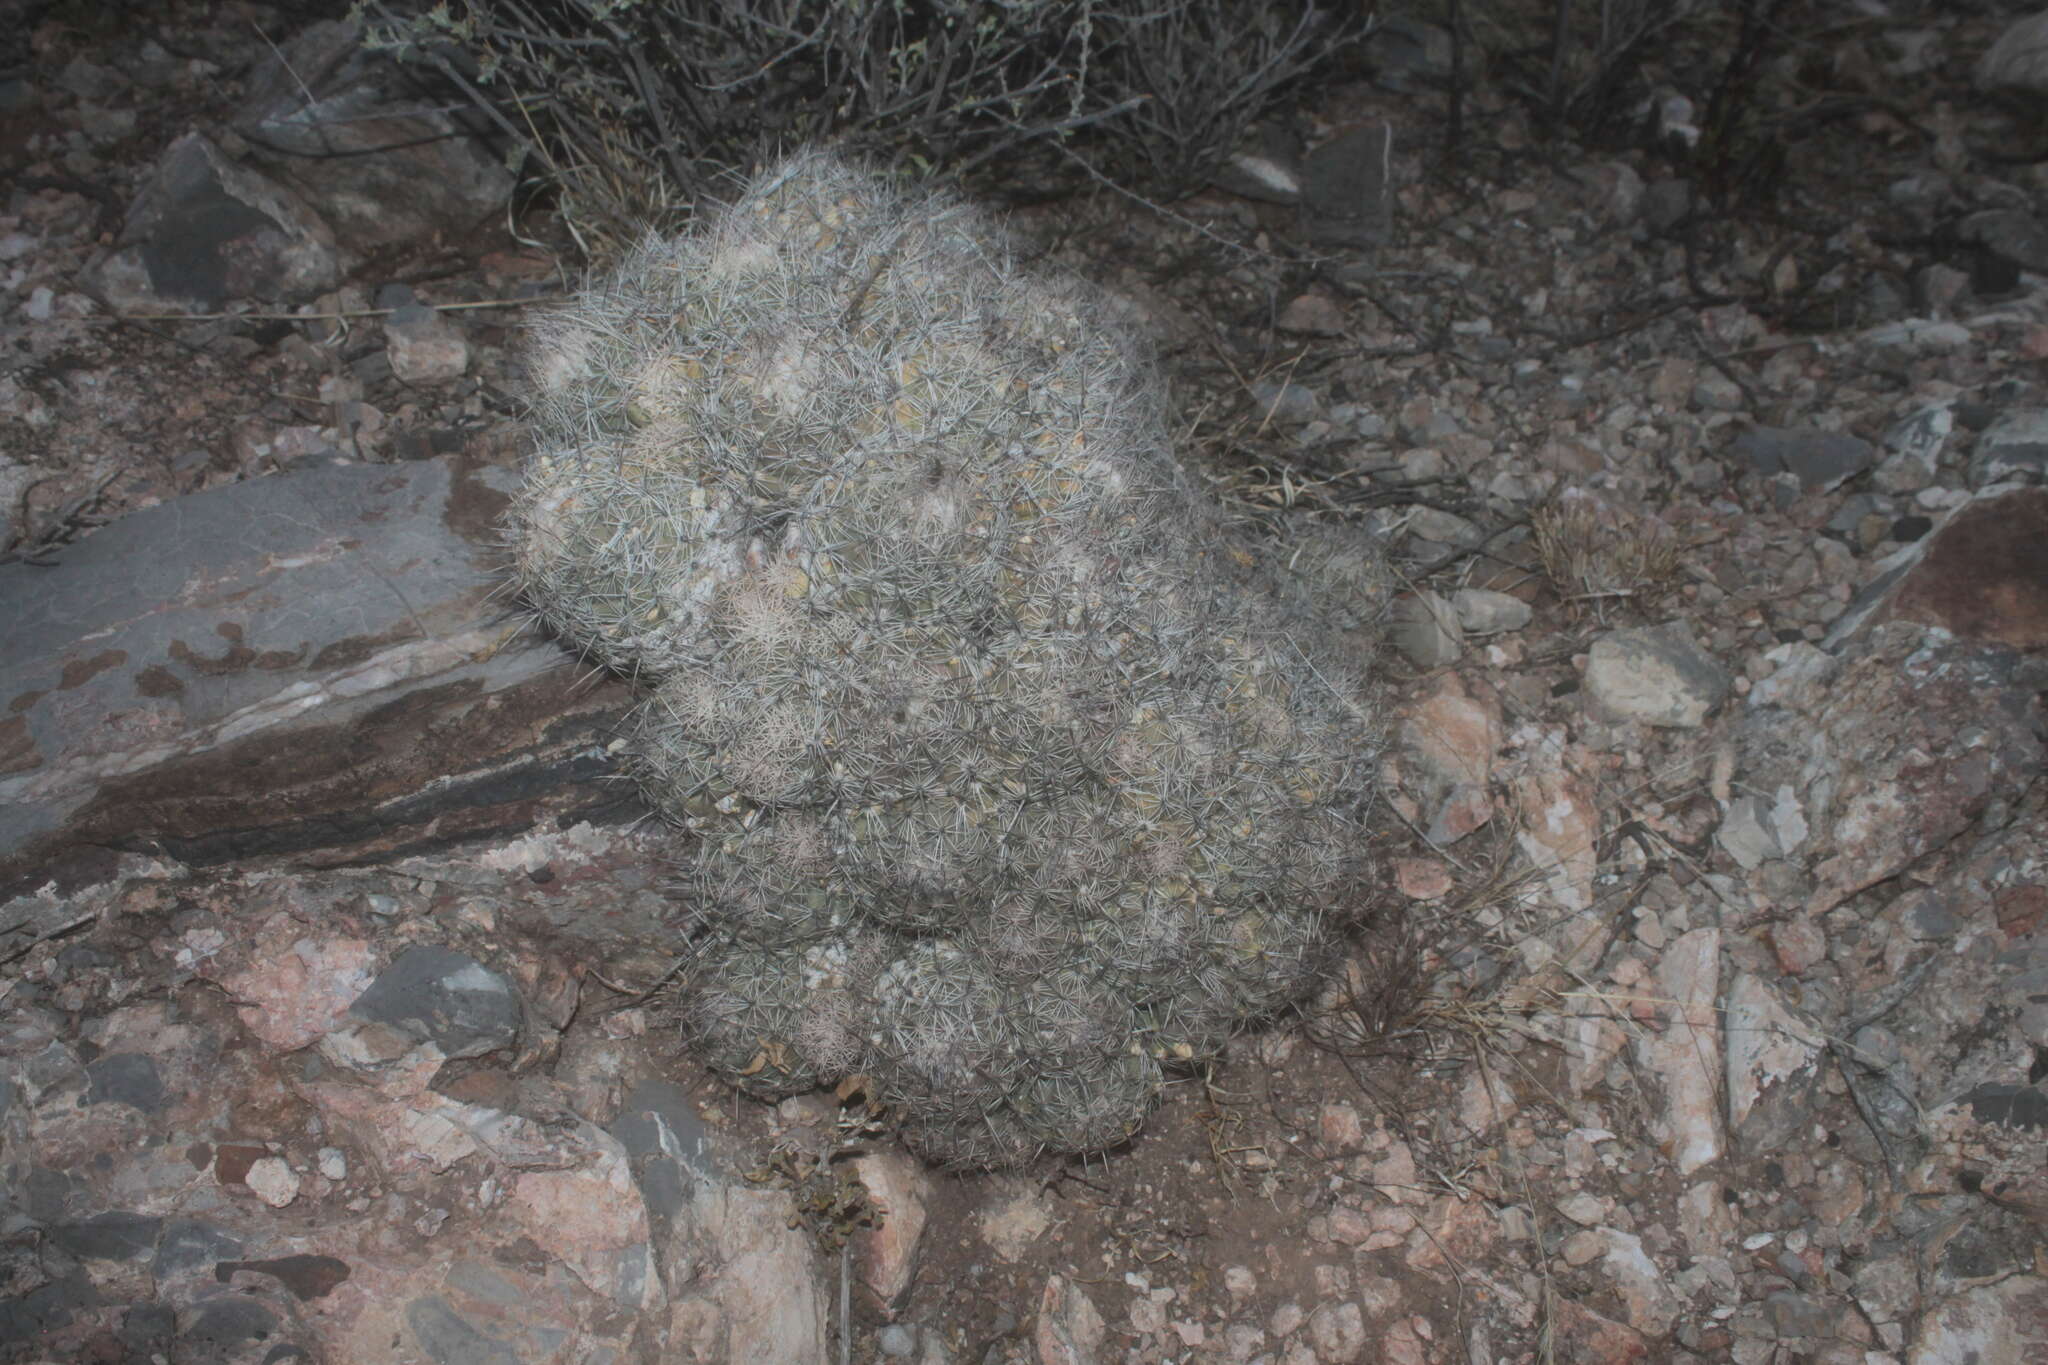 Image of Coryphantha durangensis subsp. cuencamensis (L. Bremer) Dicht & A. Lüthy